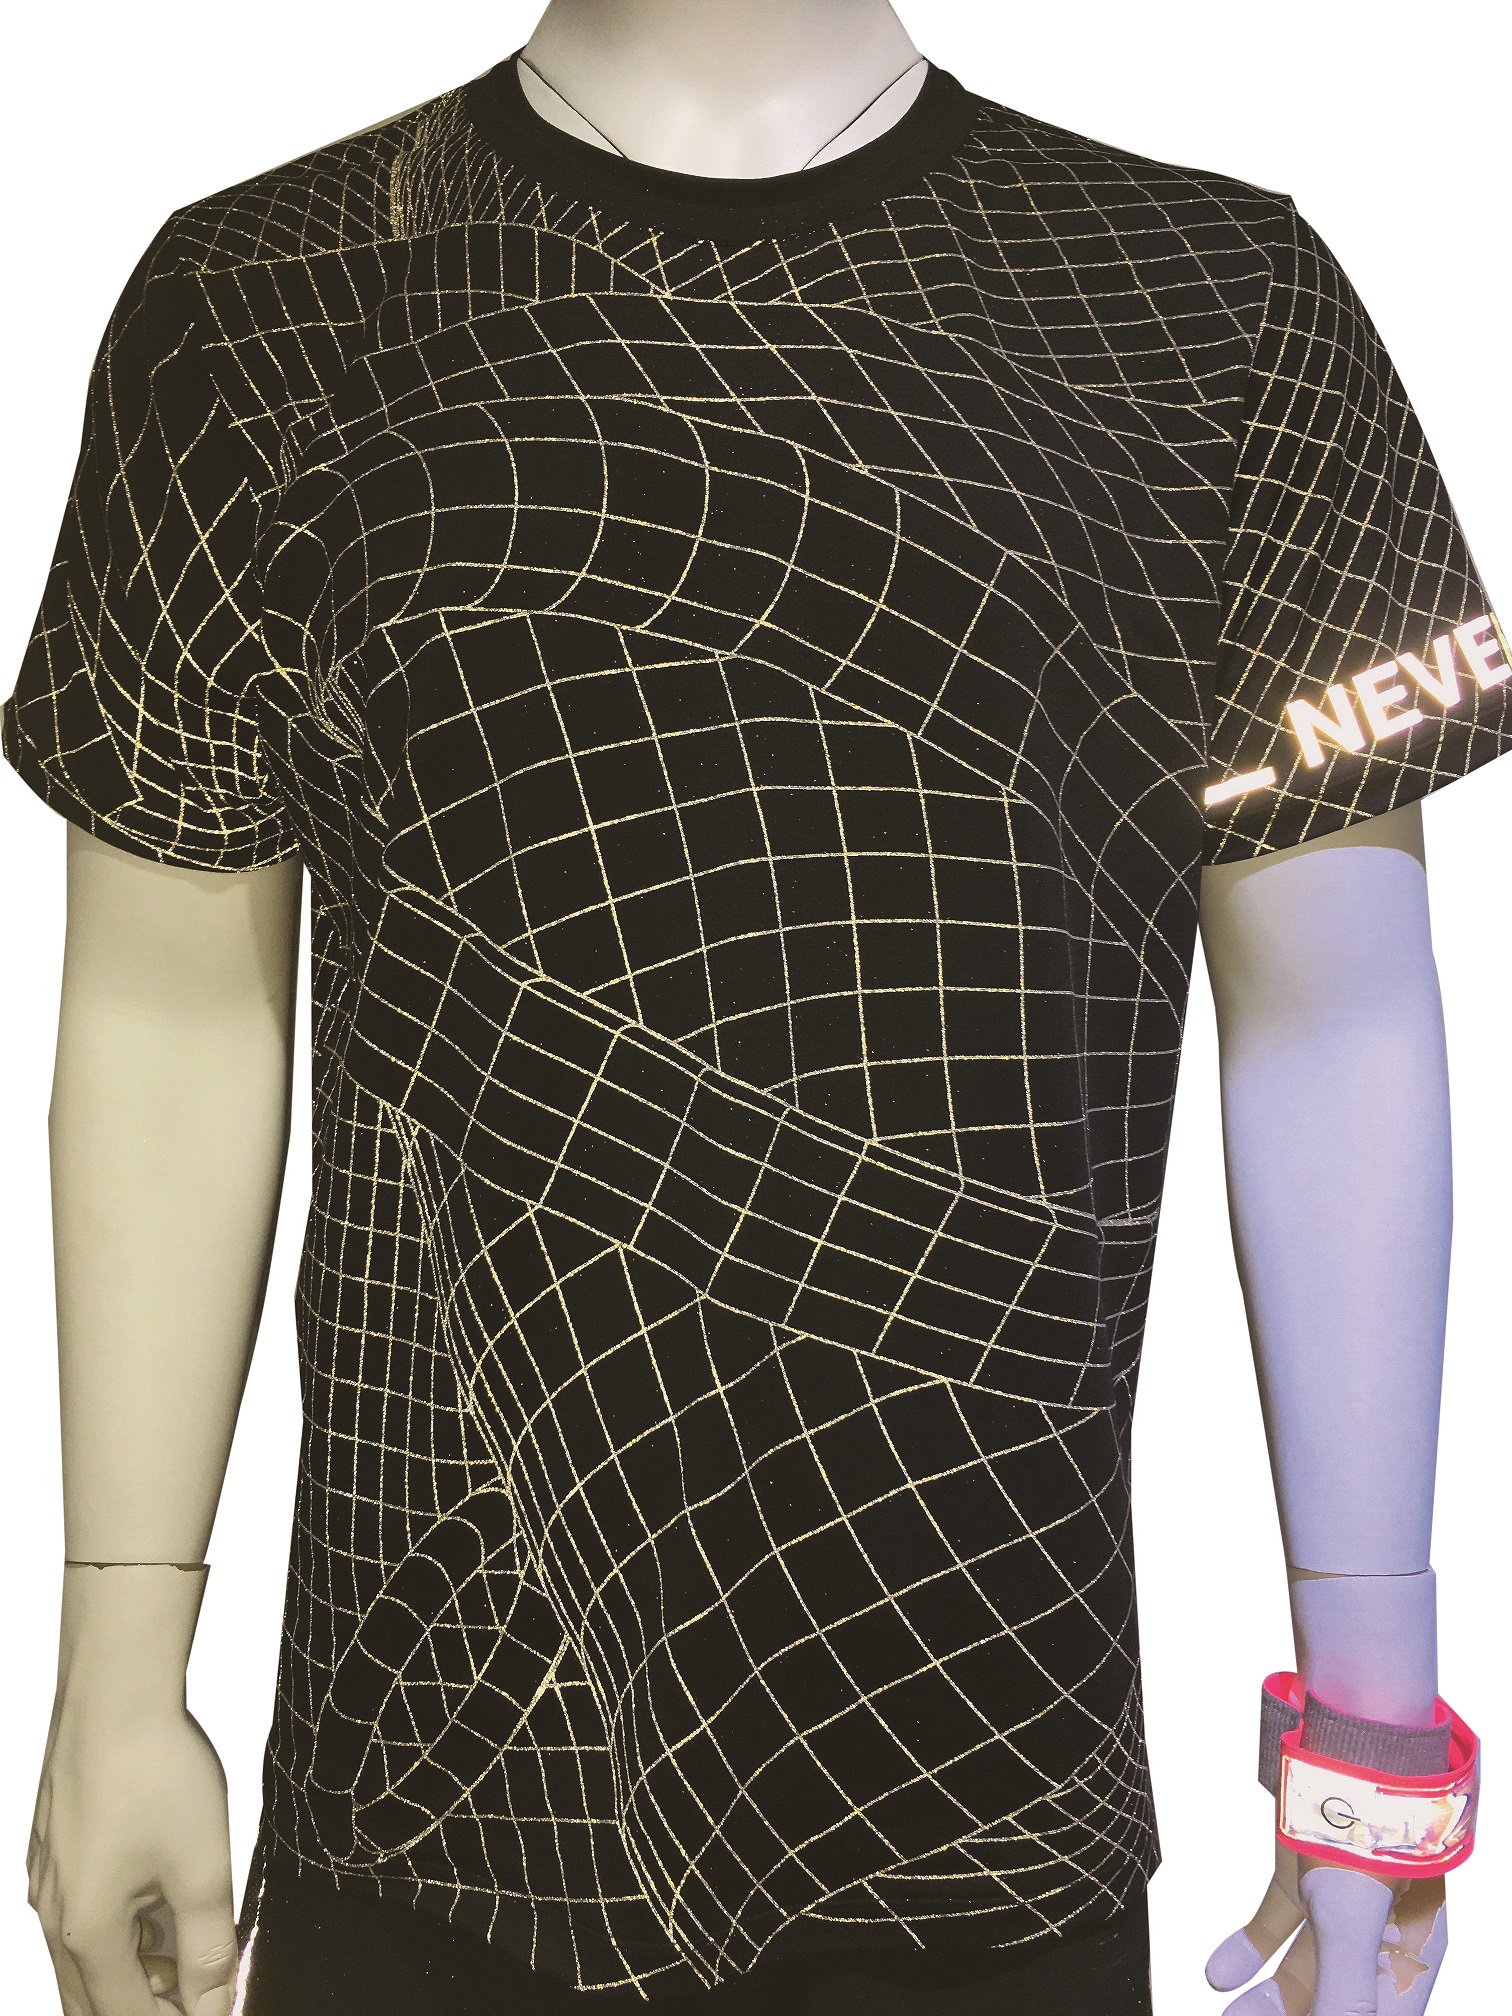 T-shirt with reflective fabric